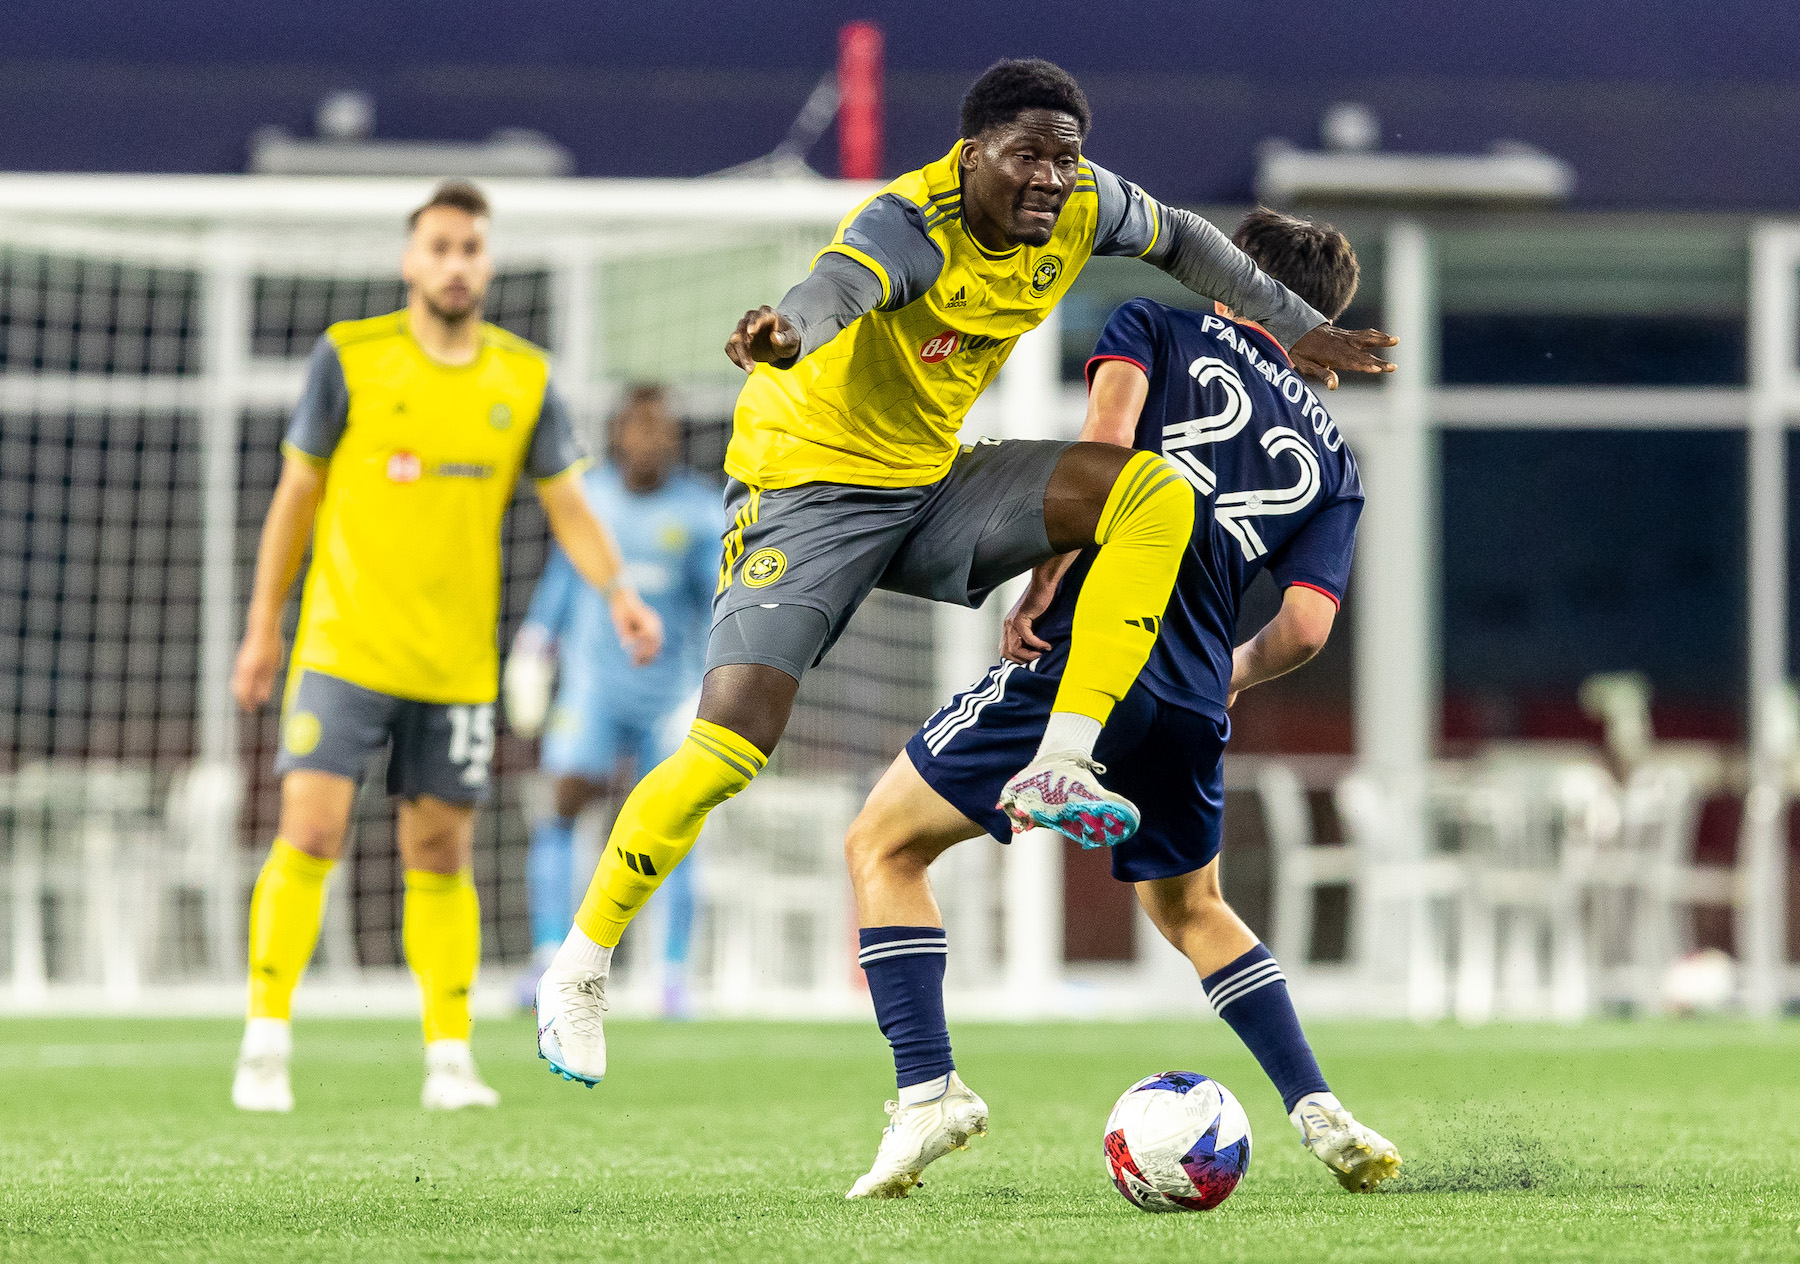 DZ Harmon hurdles the leg of a defender in the Riverhounds' 1-0 win over the New England Revolution in the U.S. Open Cup on May 9, 2023 at Gillette Stadium in Foxborough, Mass.